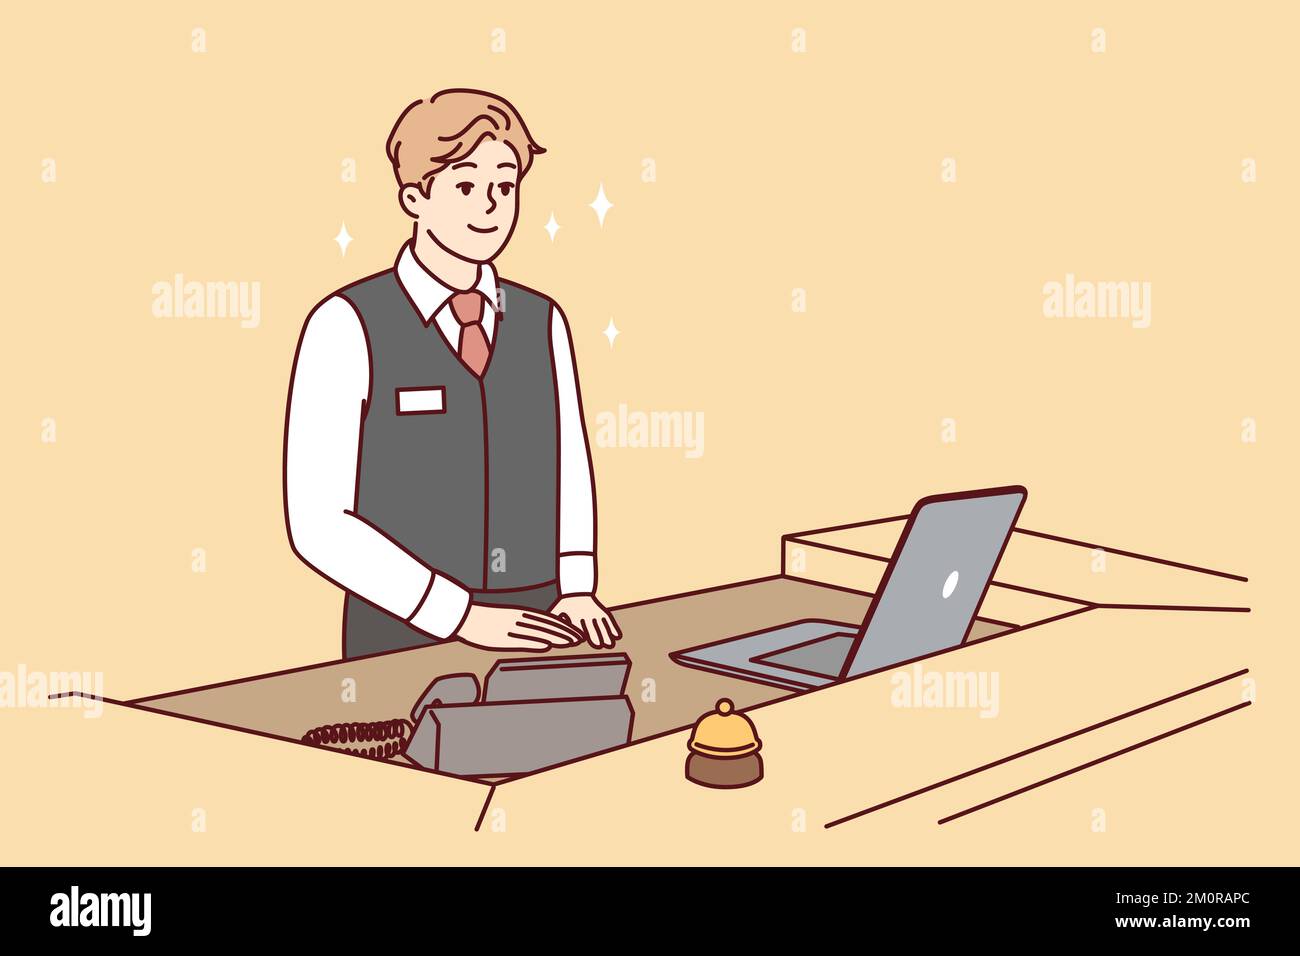 Man working as receptionist in hotel or restaurant stands behind counter with laptop and phone. Happy guy in work suit with badge is waiting for arrival of guests and clients. Flat vector image Stock Vector